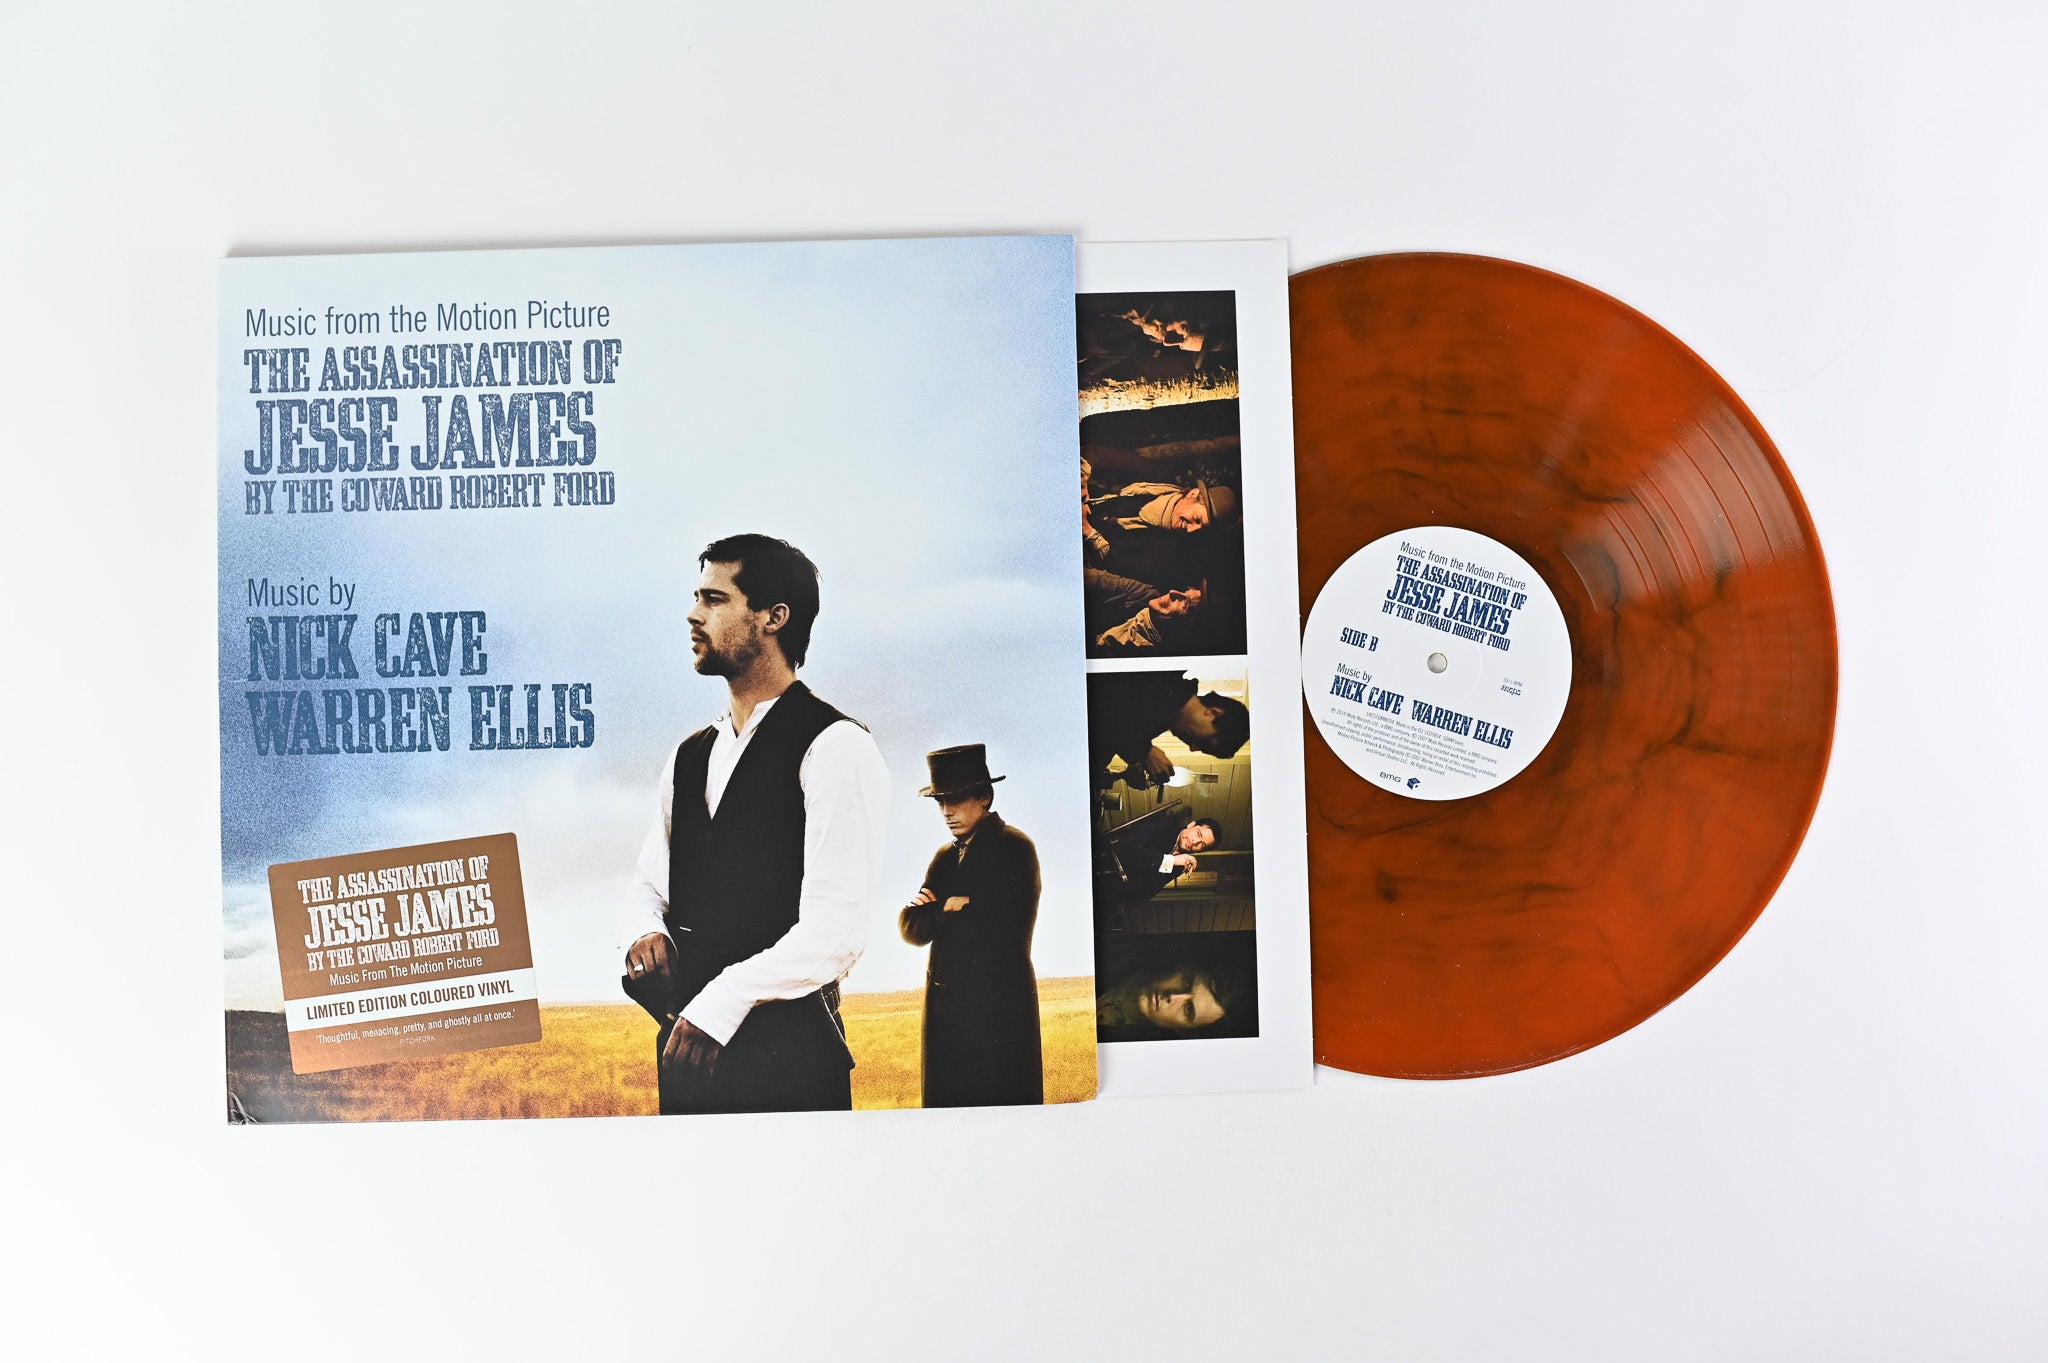 Nick Cave & Warren Ellis - The Assassination Of Jesse James By The Coward Robert Ford (Music From The Motion Picture) on Mute - Colored Vinyl